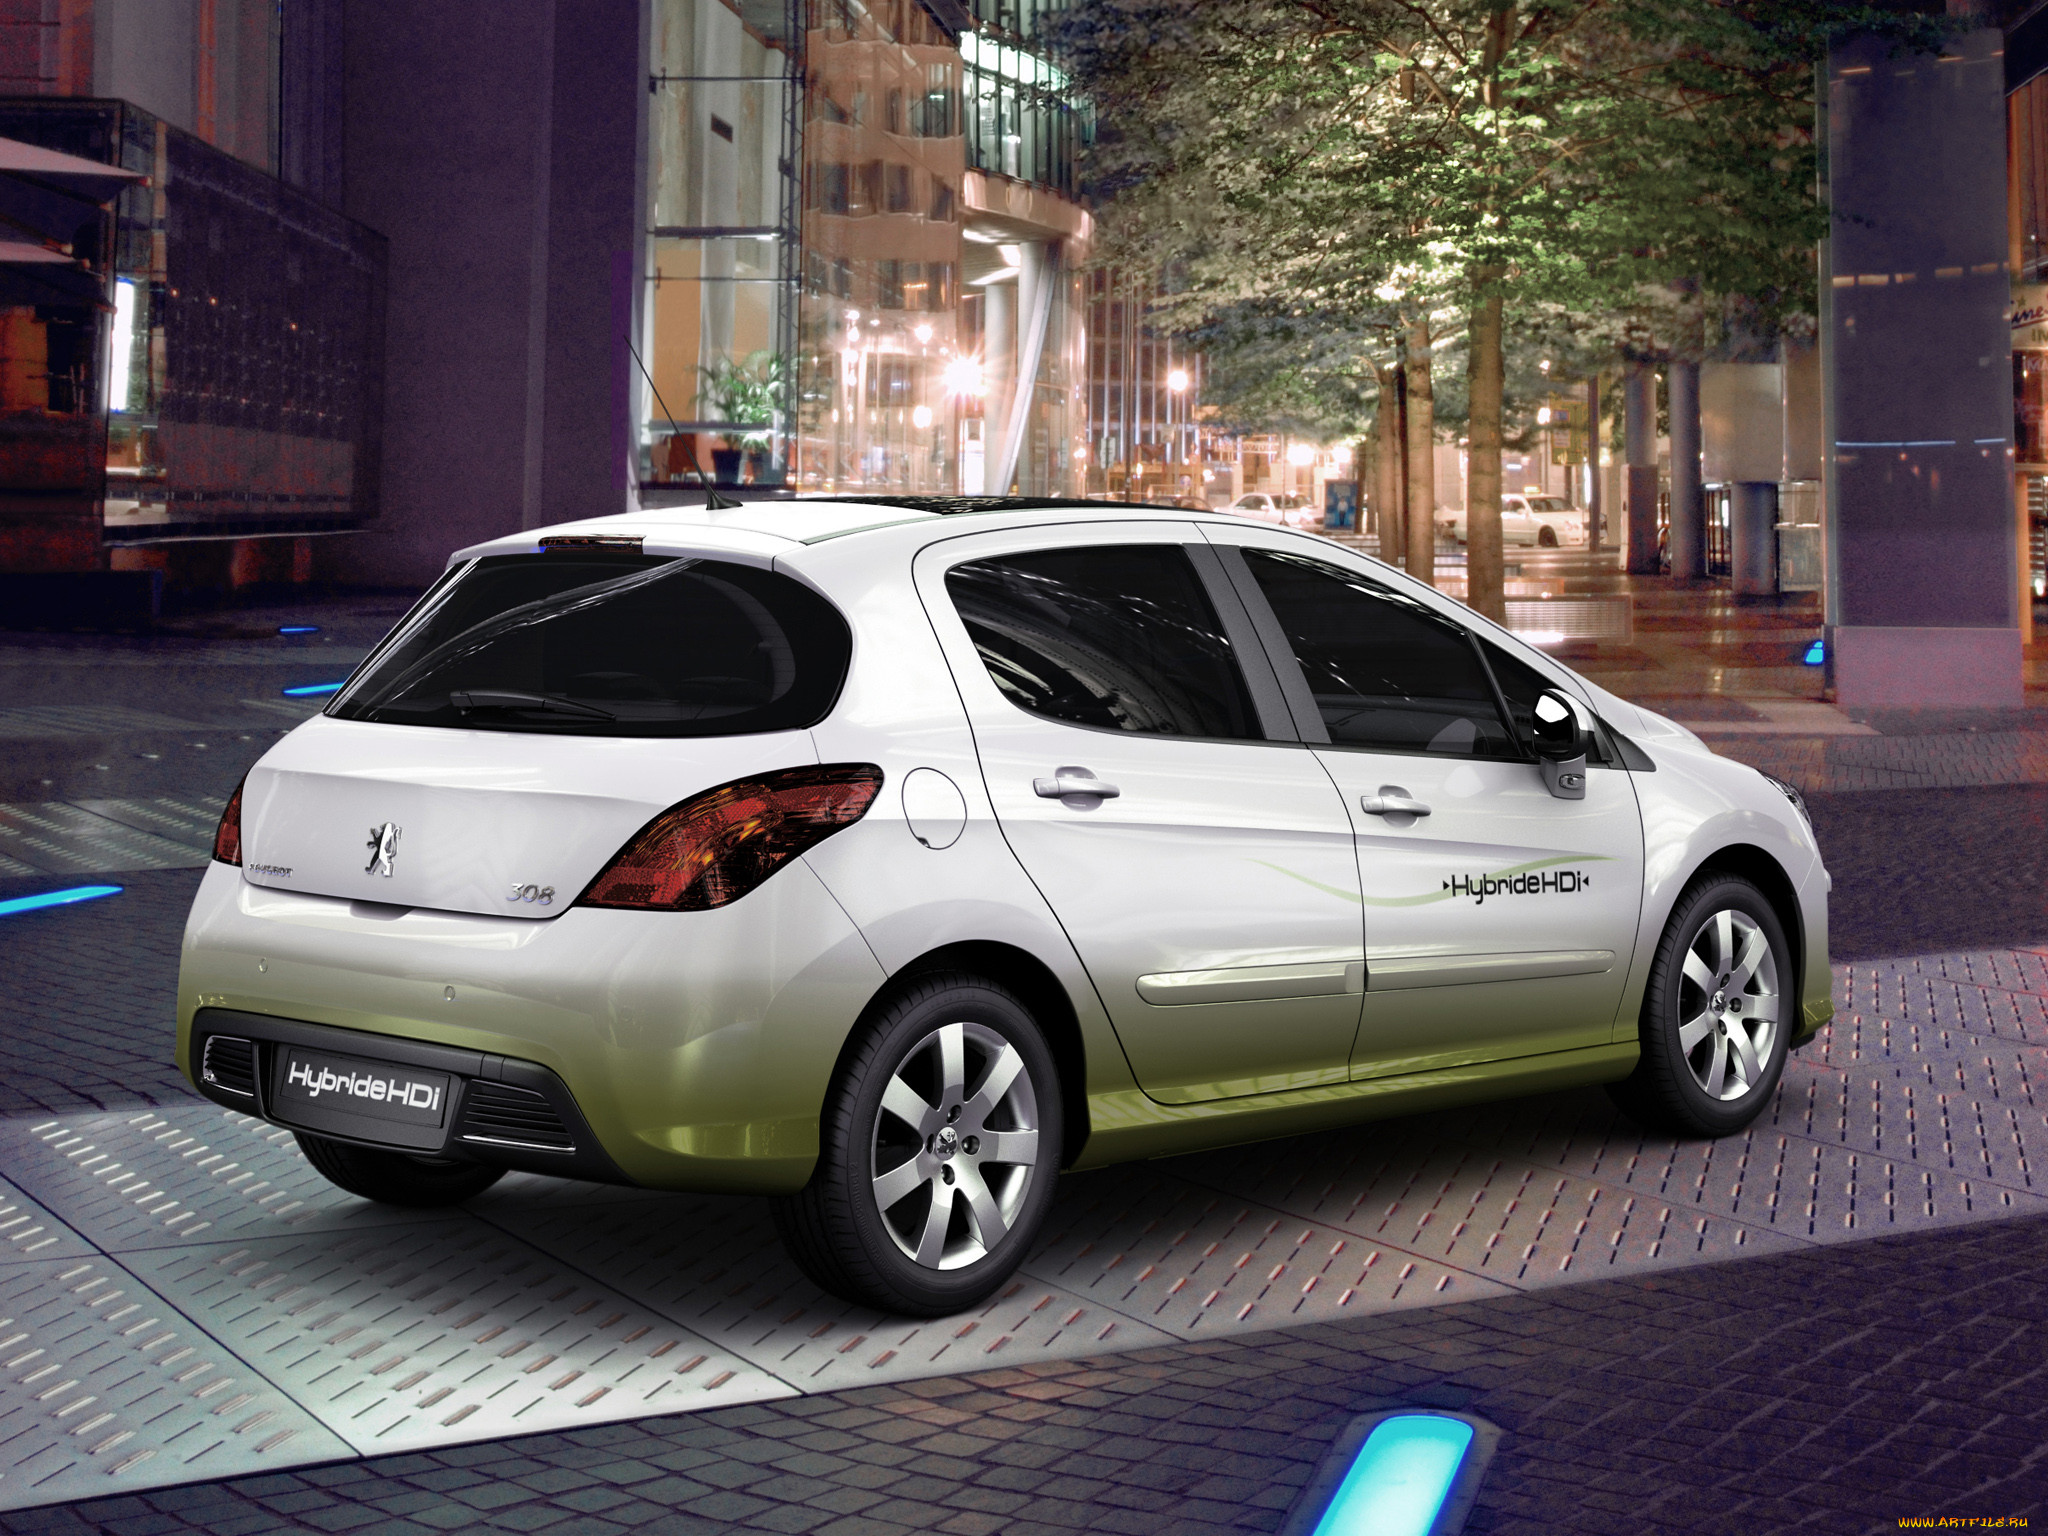 , peugeot, 2007, concept, hdi, hybride, 308